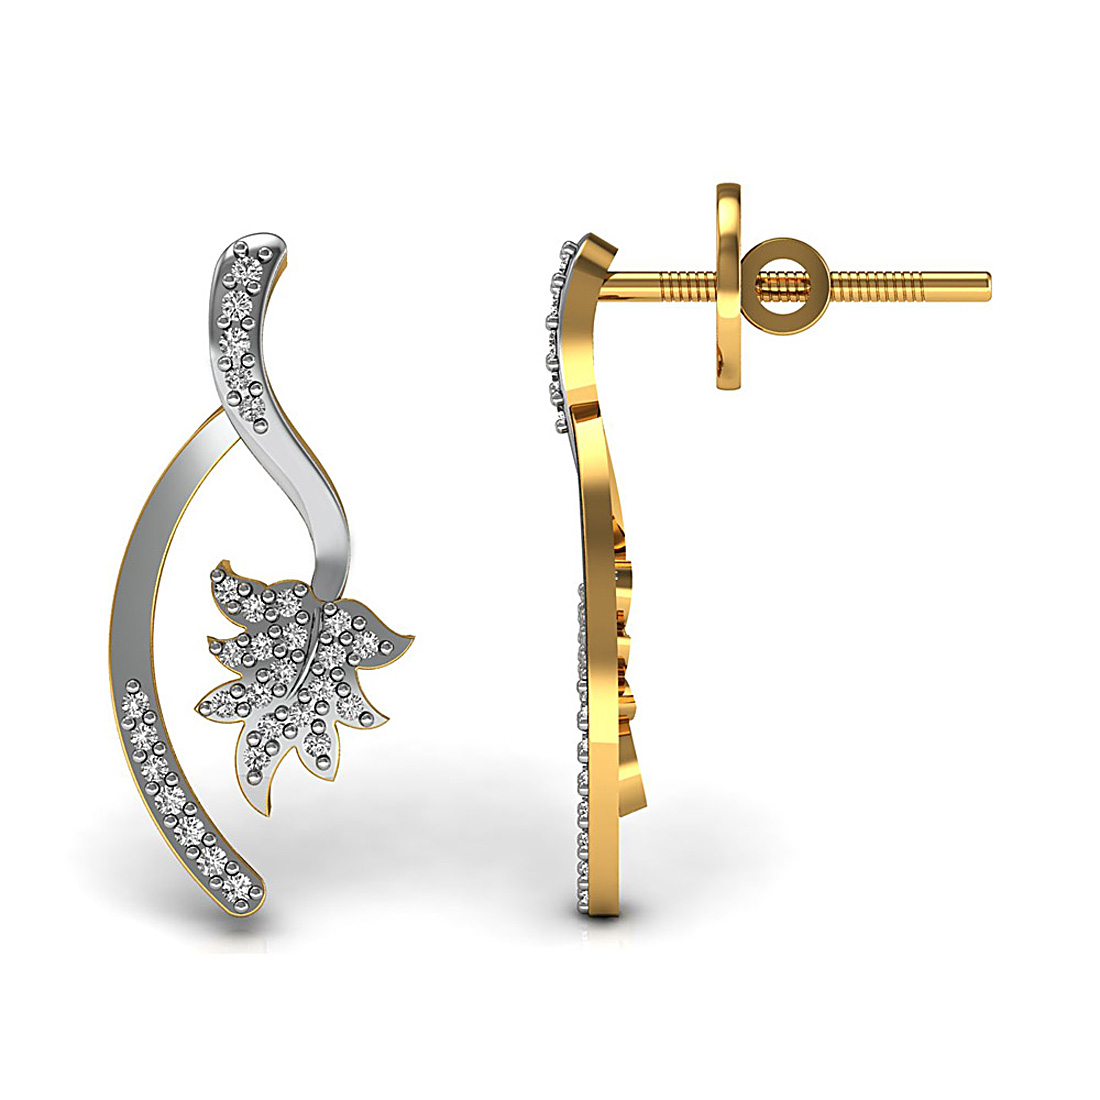 Beautiful pair of leaf style stud earrings studded with natural diamond and made in 18k solid yellow gold.